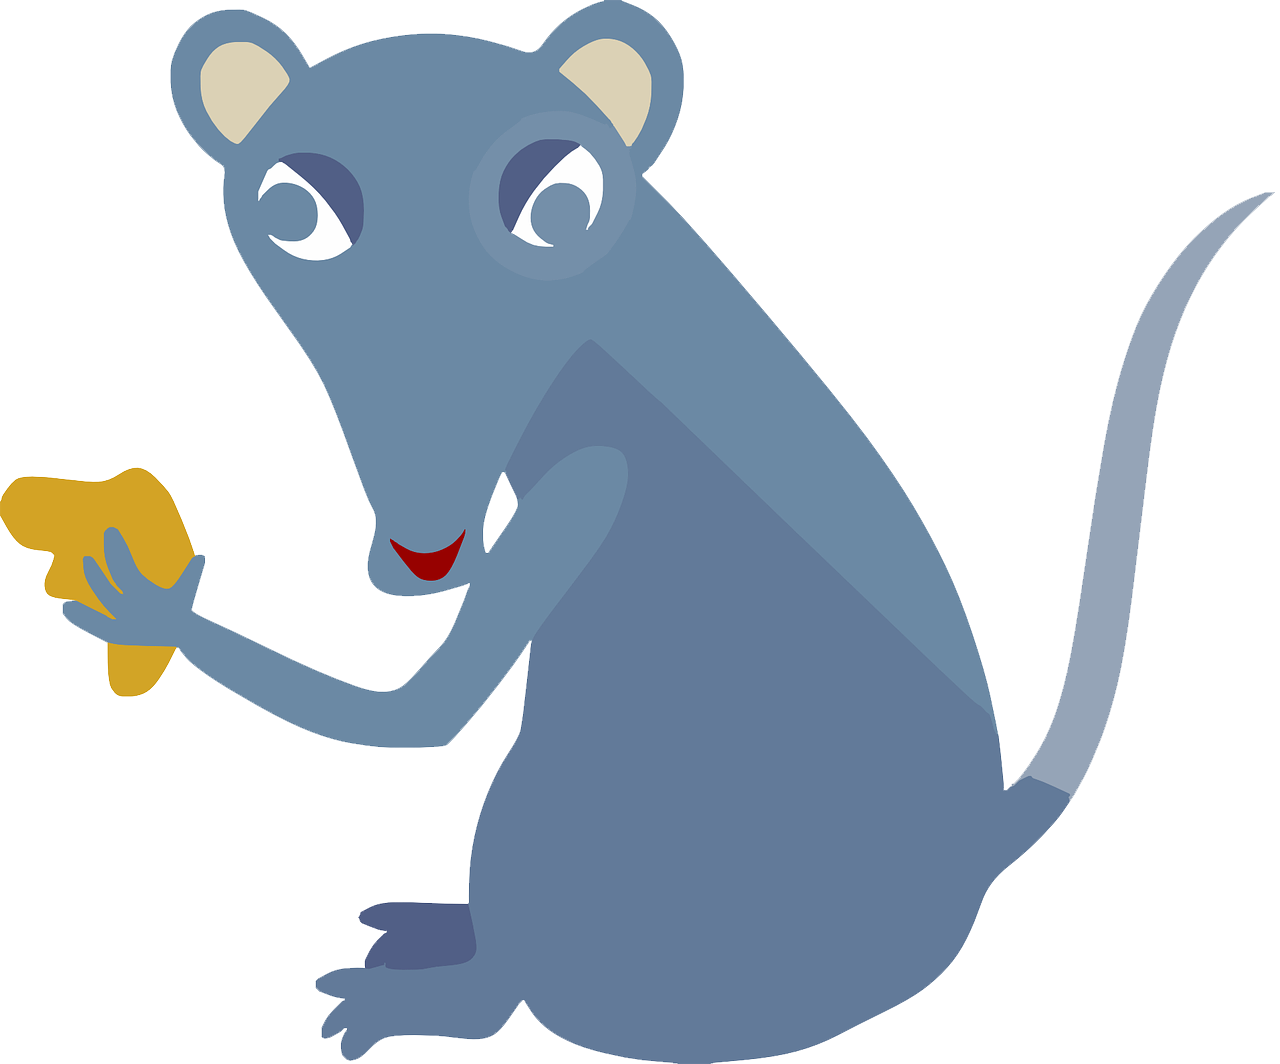 Rat free to use clipart